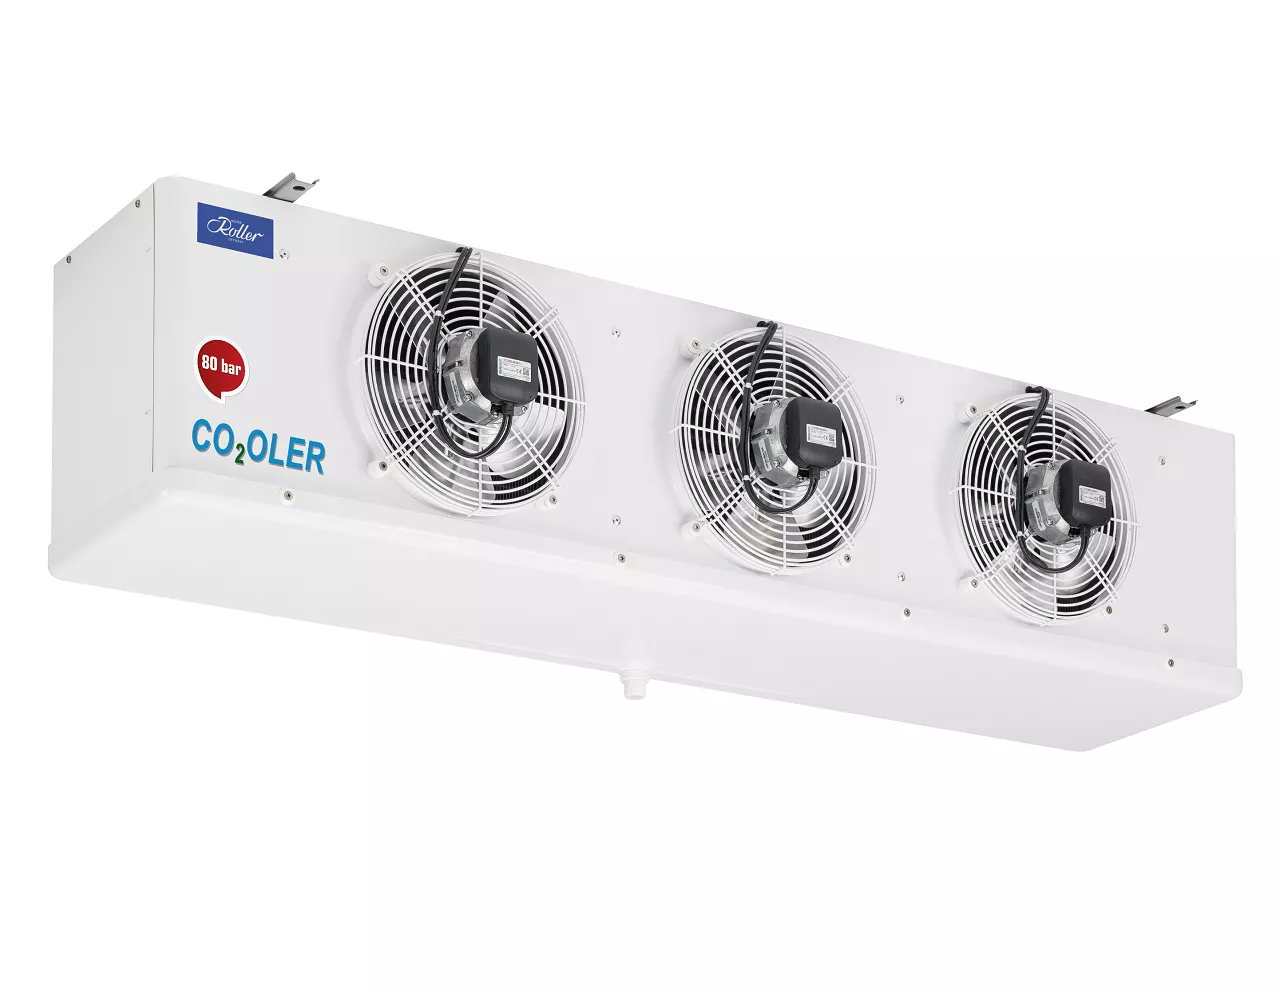 Eurovent certification for Walter Roller's CO2 air coolers 